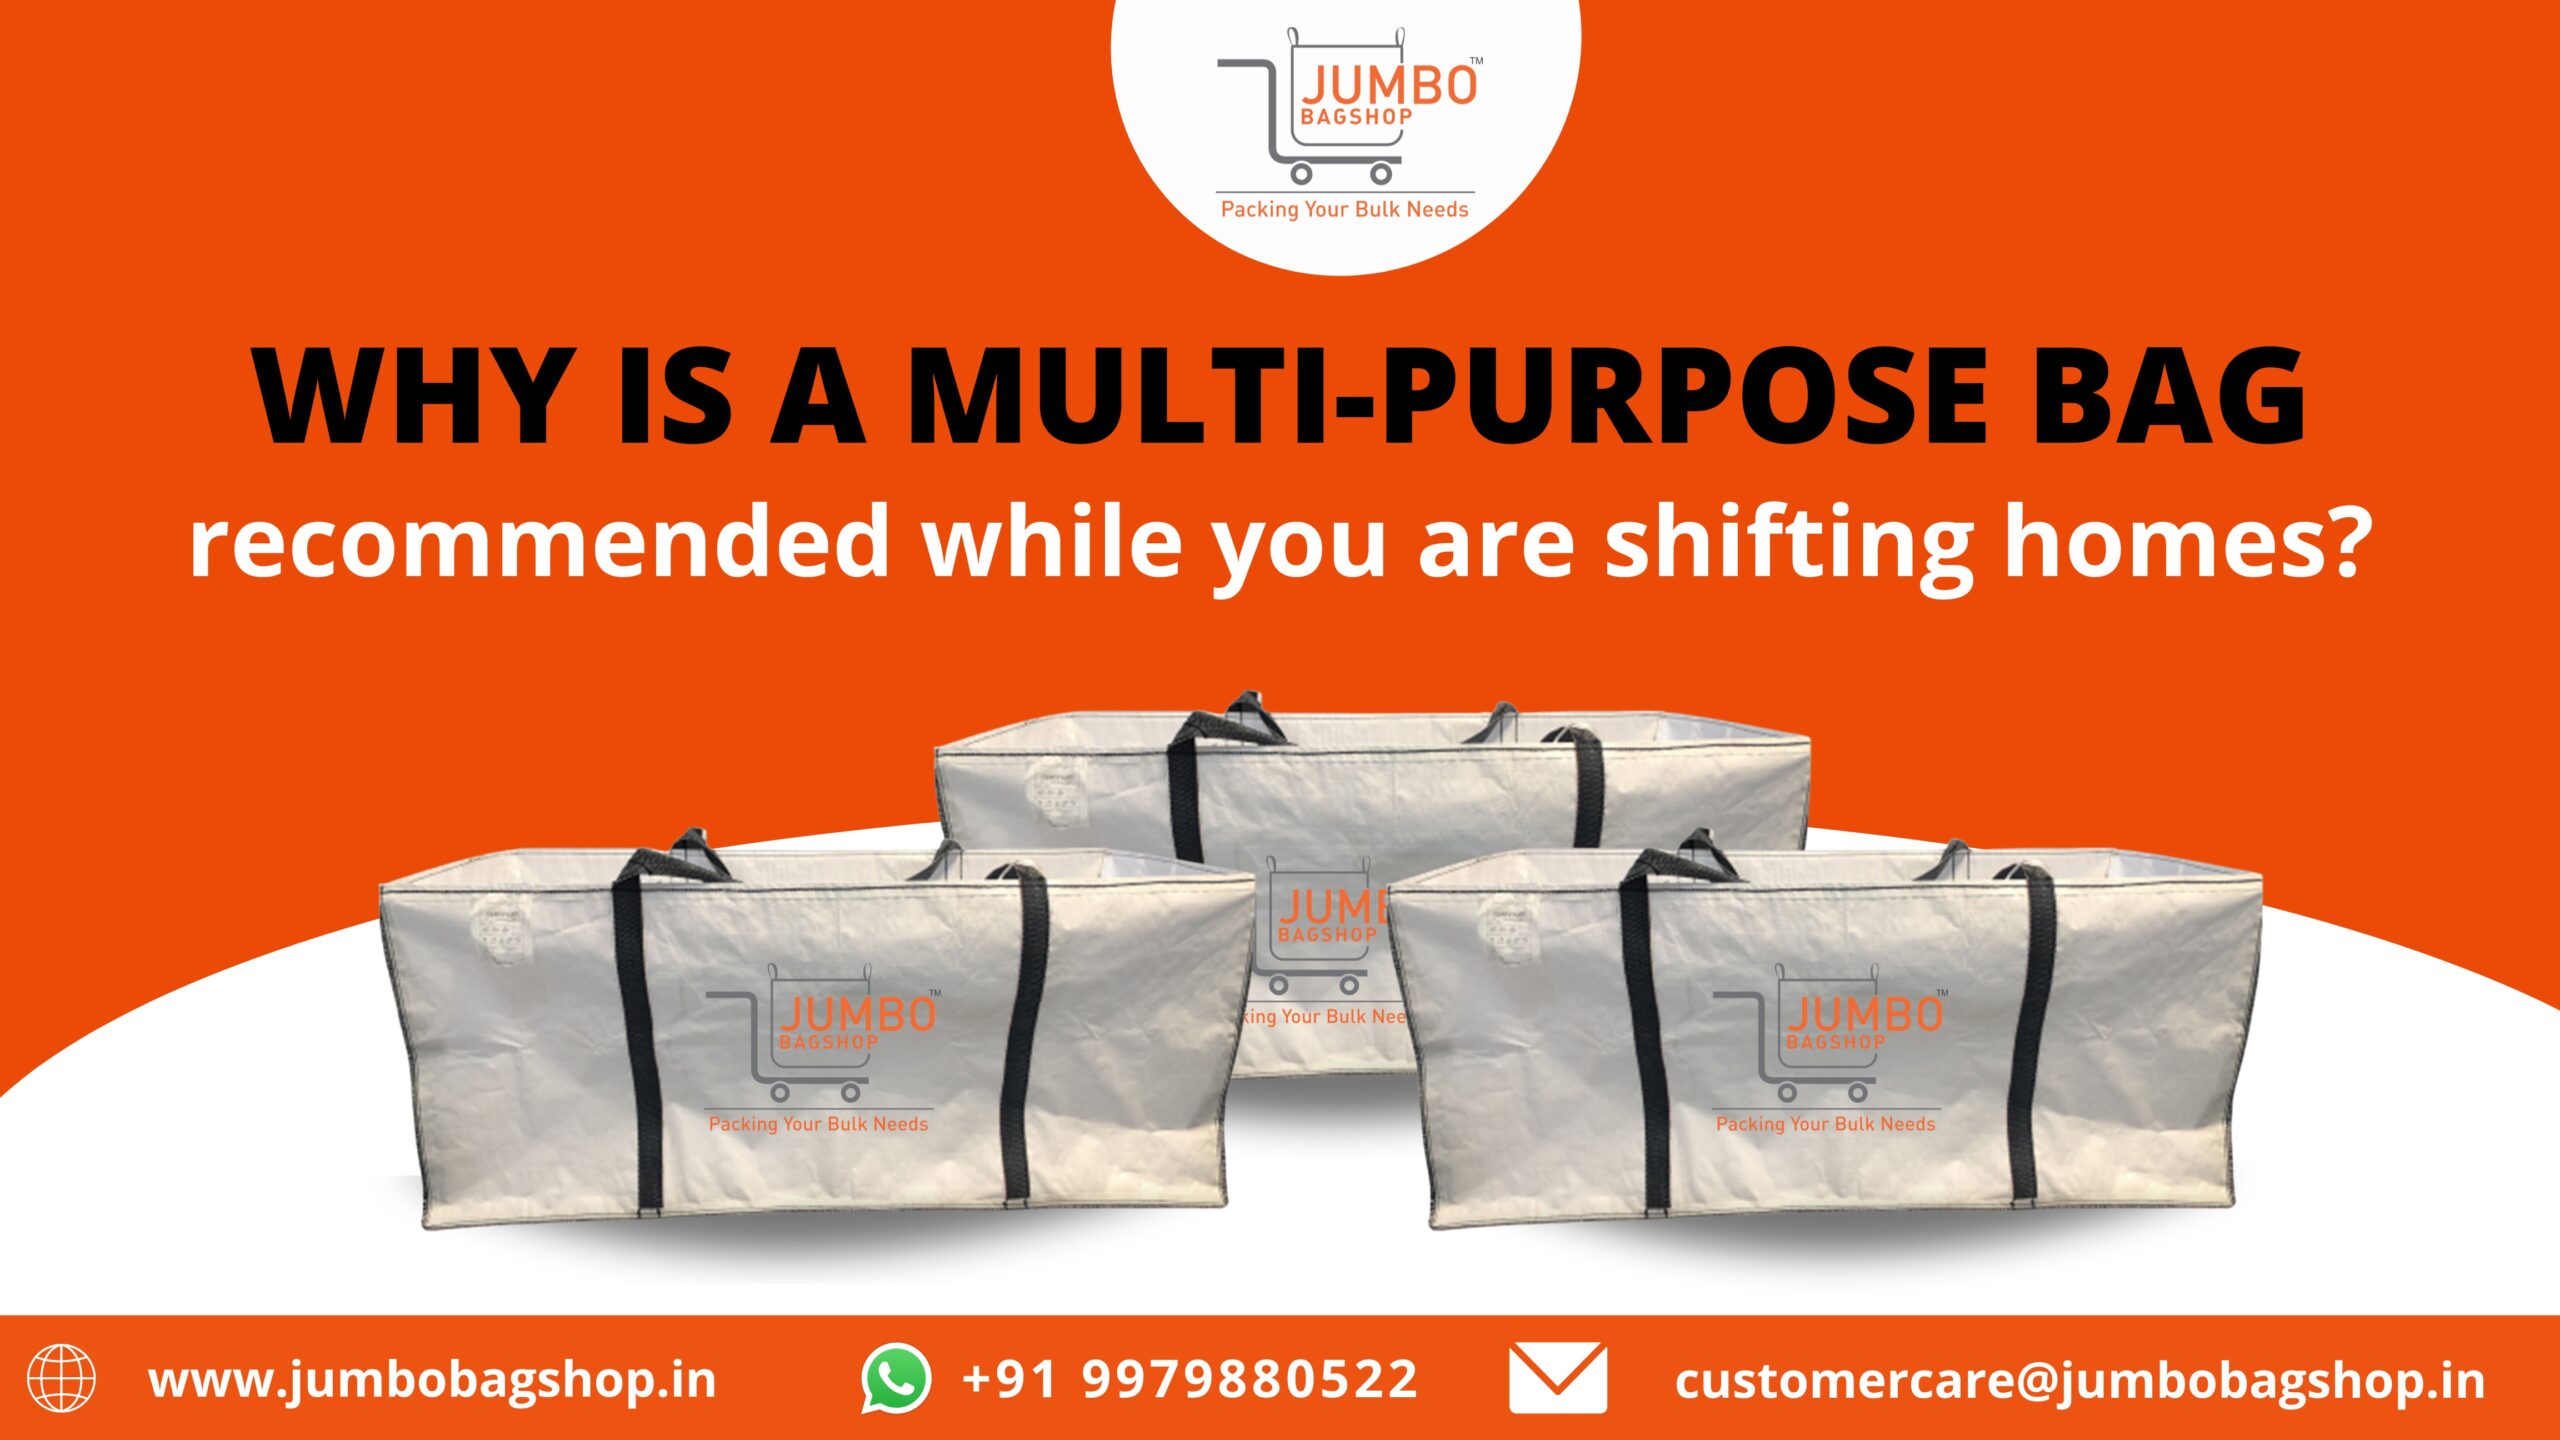 https://blog.jumbobagshop.in/wp-content/uploads/2022/08/Why-is-a-Multi-Purpose-Bag-recommended-while-you-are-shifting-homes-scaled.jpg